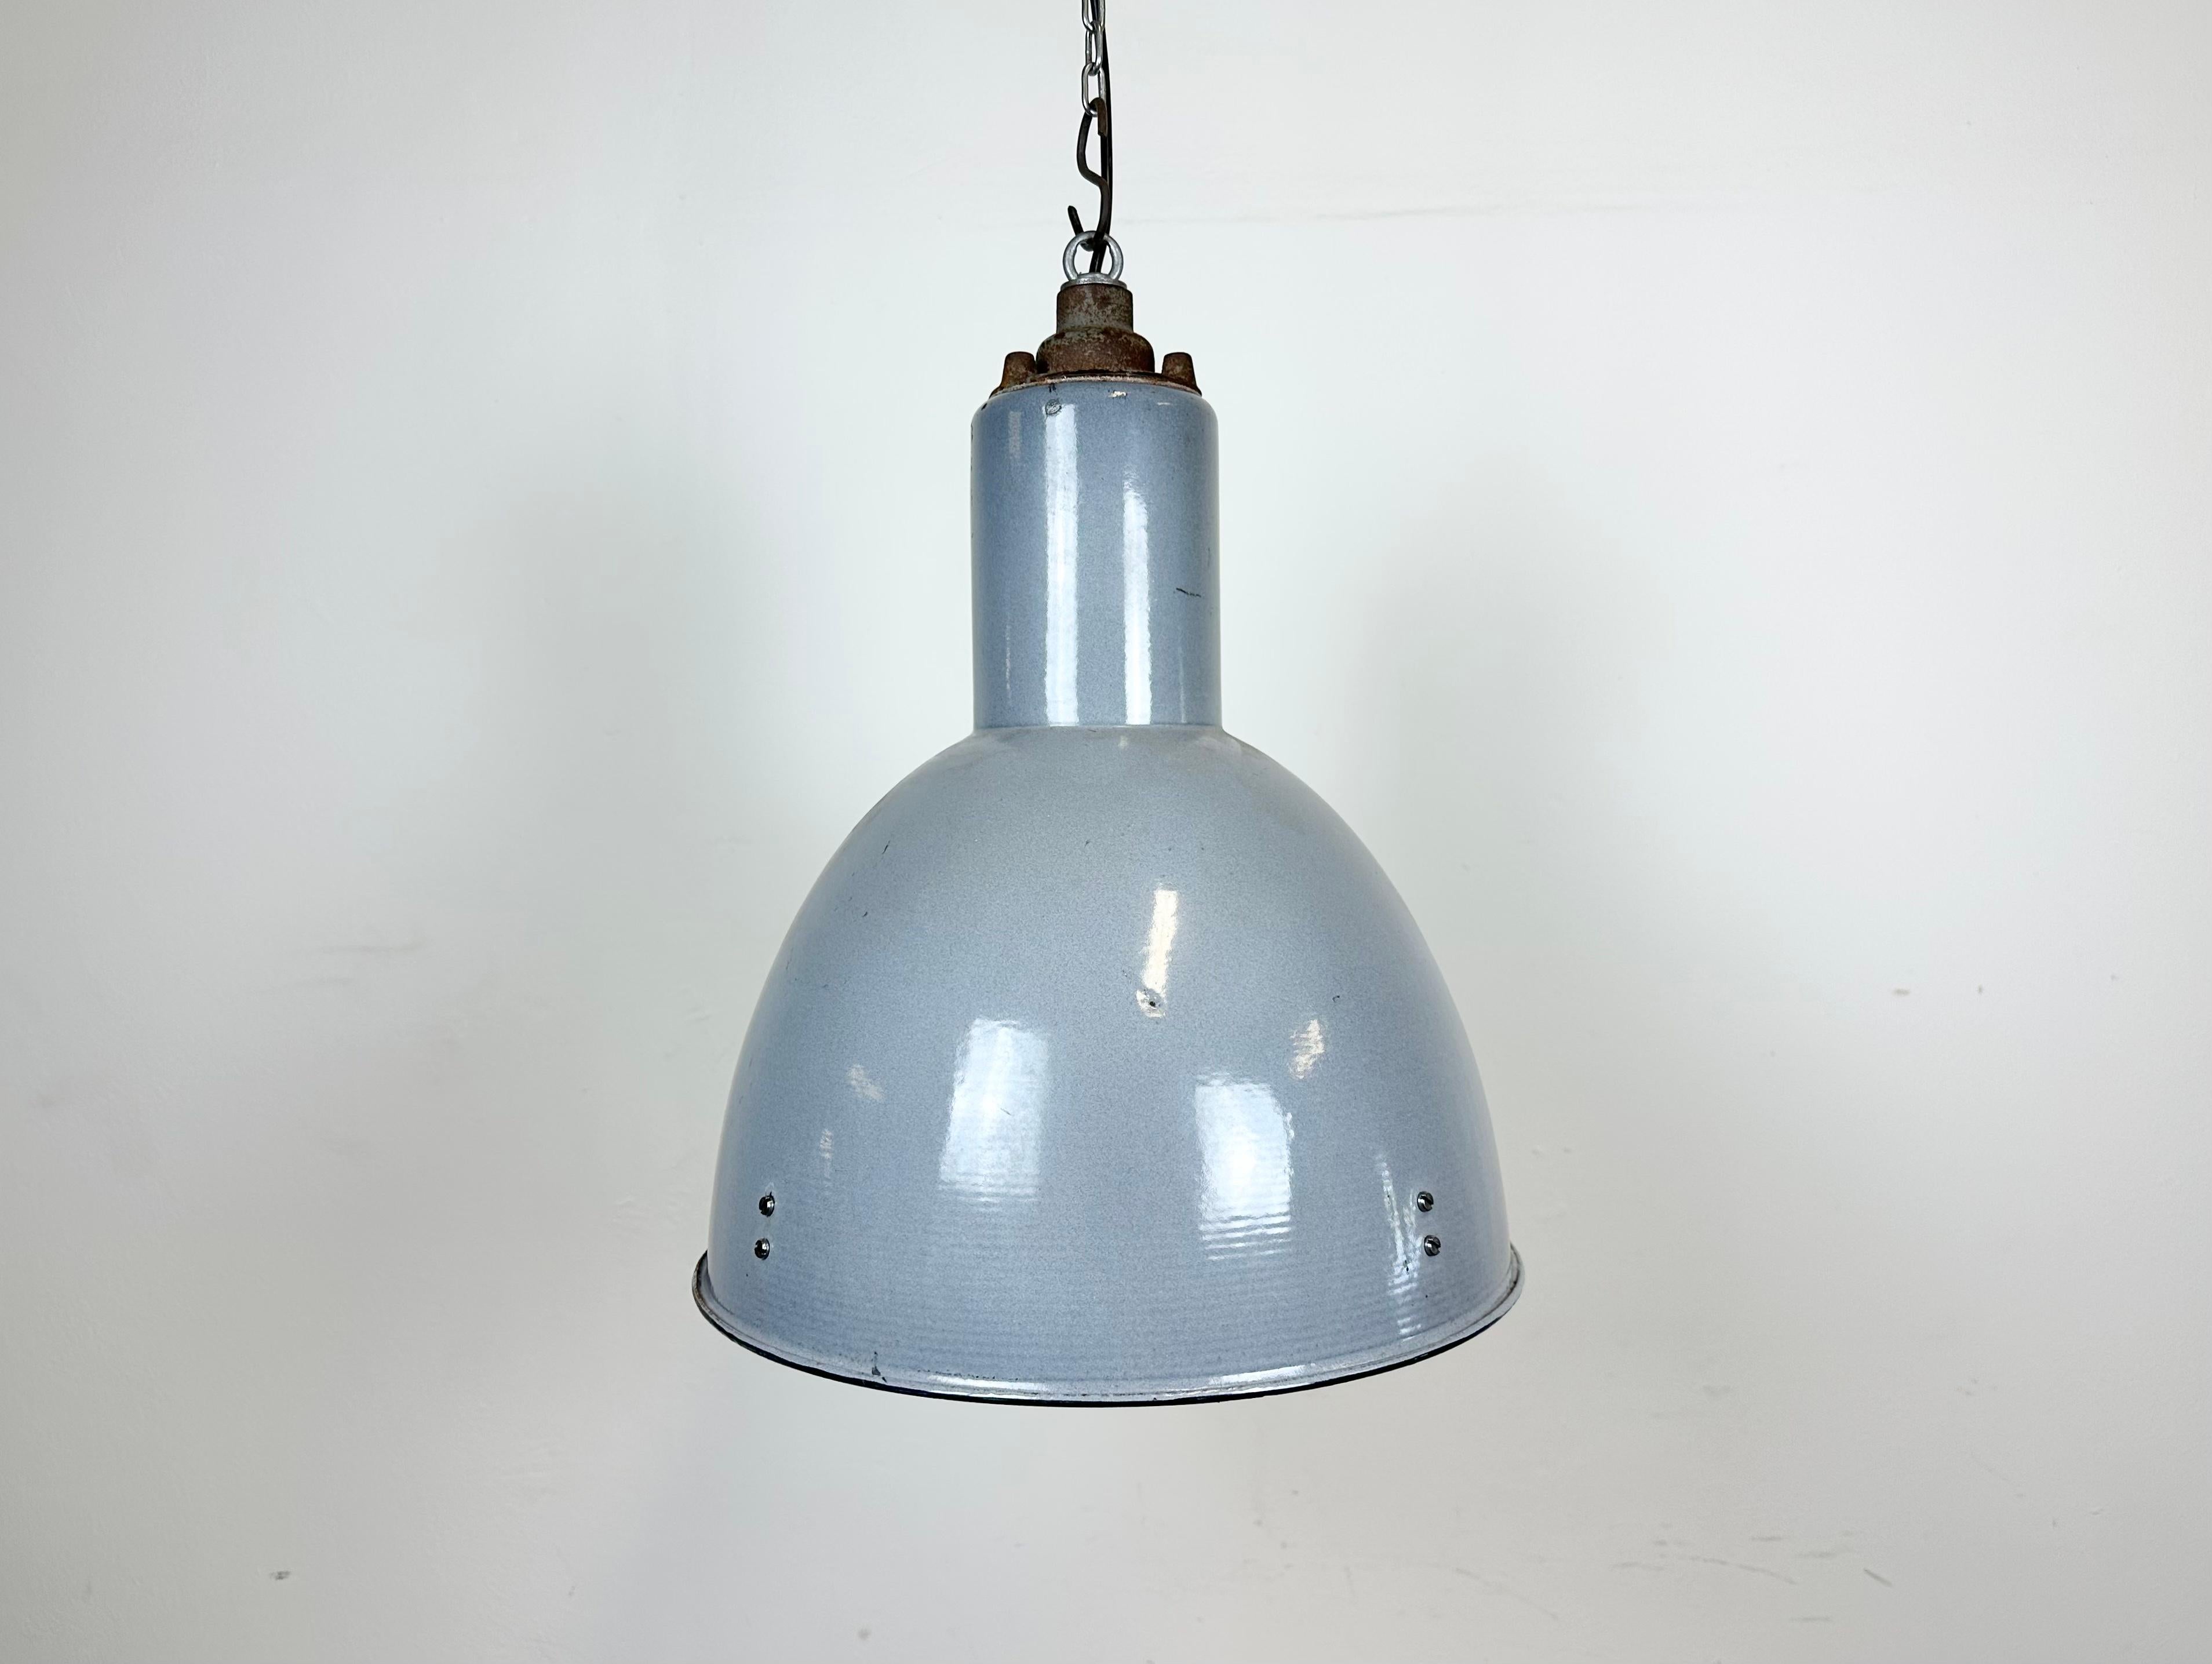 Vintage Industrial light in Bauhaus style made in former Czechoslovakia during the 1950s.It features a grey enamel body with white enamel interior and iron top. New porcelain socket requires E27/E26 lightbulbs. New wire. The weight of the lamp is 3